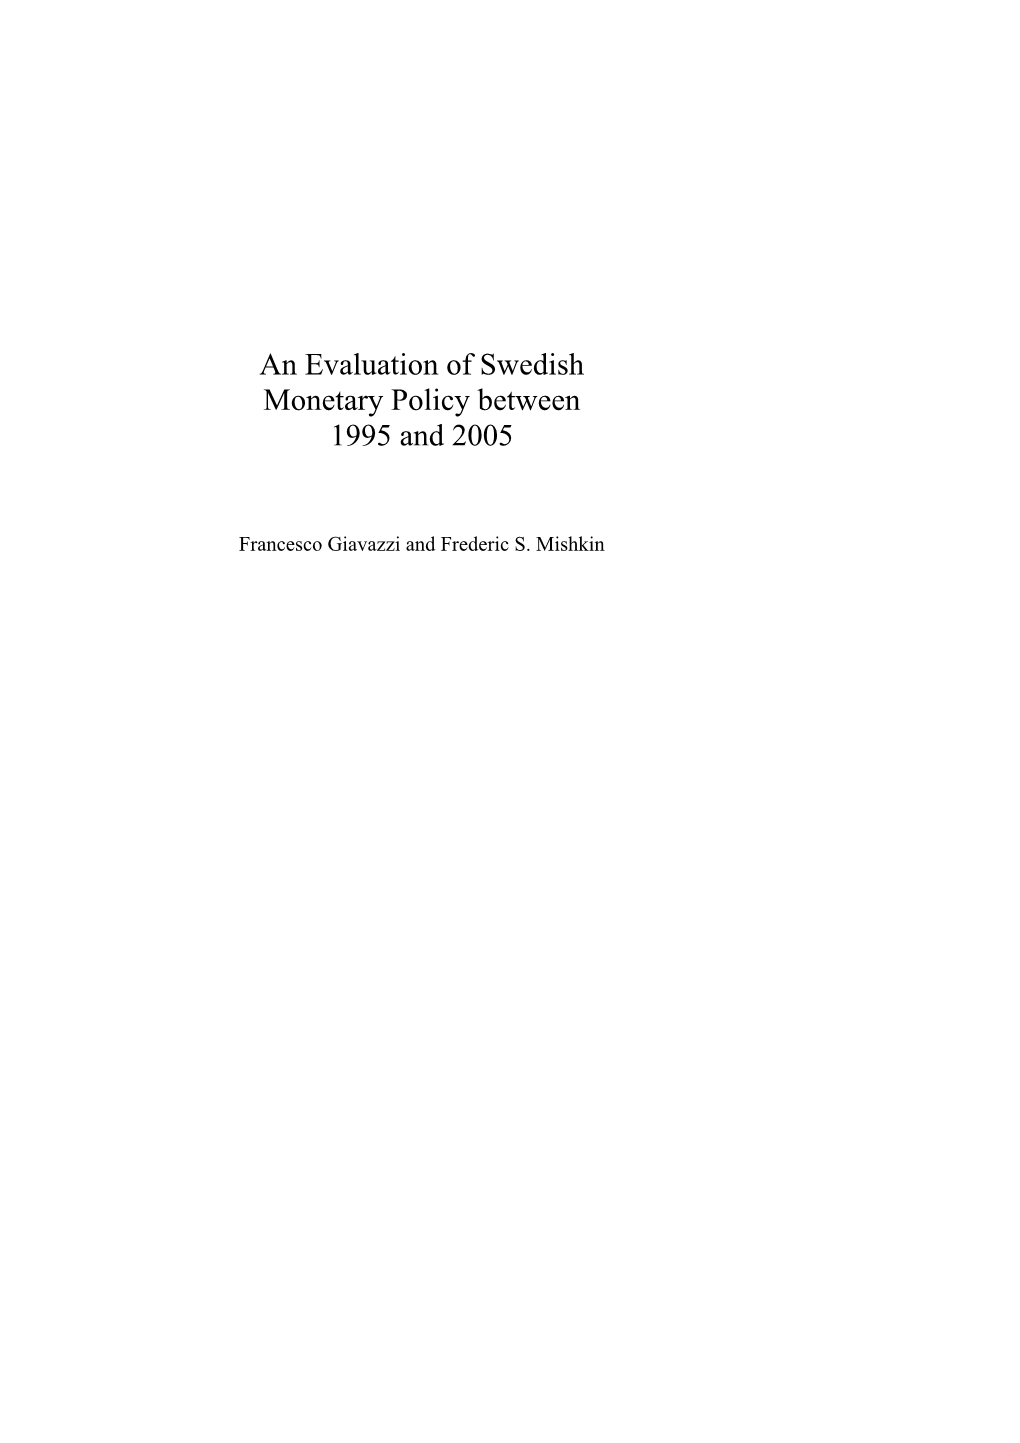 An Evaluation of Swedish Monetary Policy Between 1995 and 2005